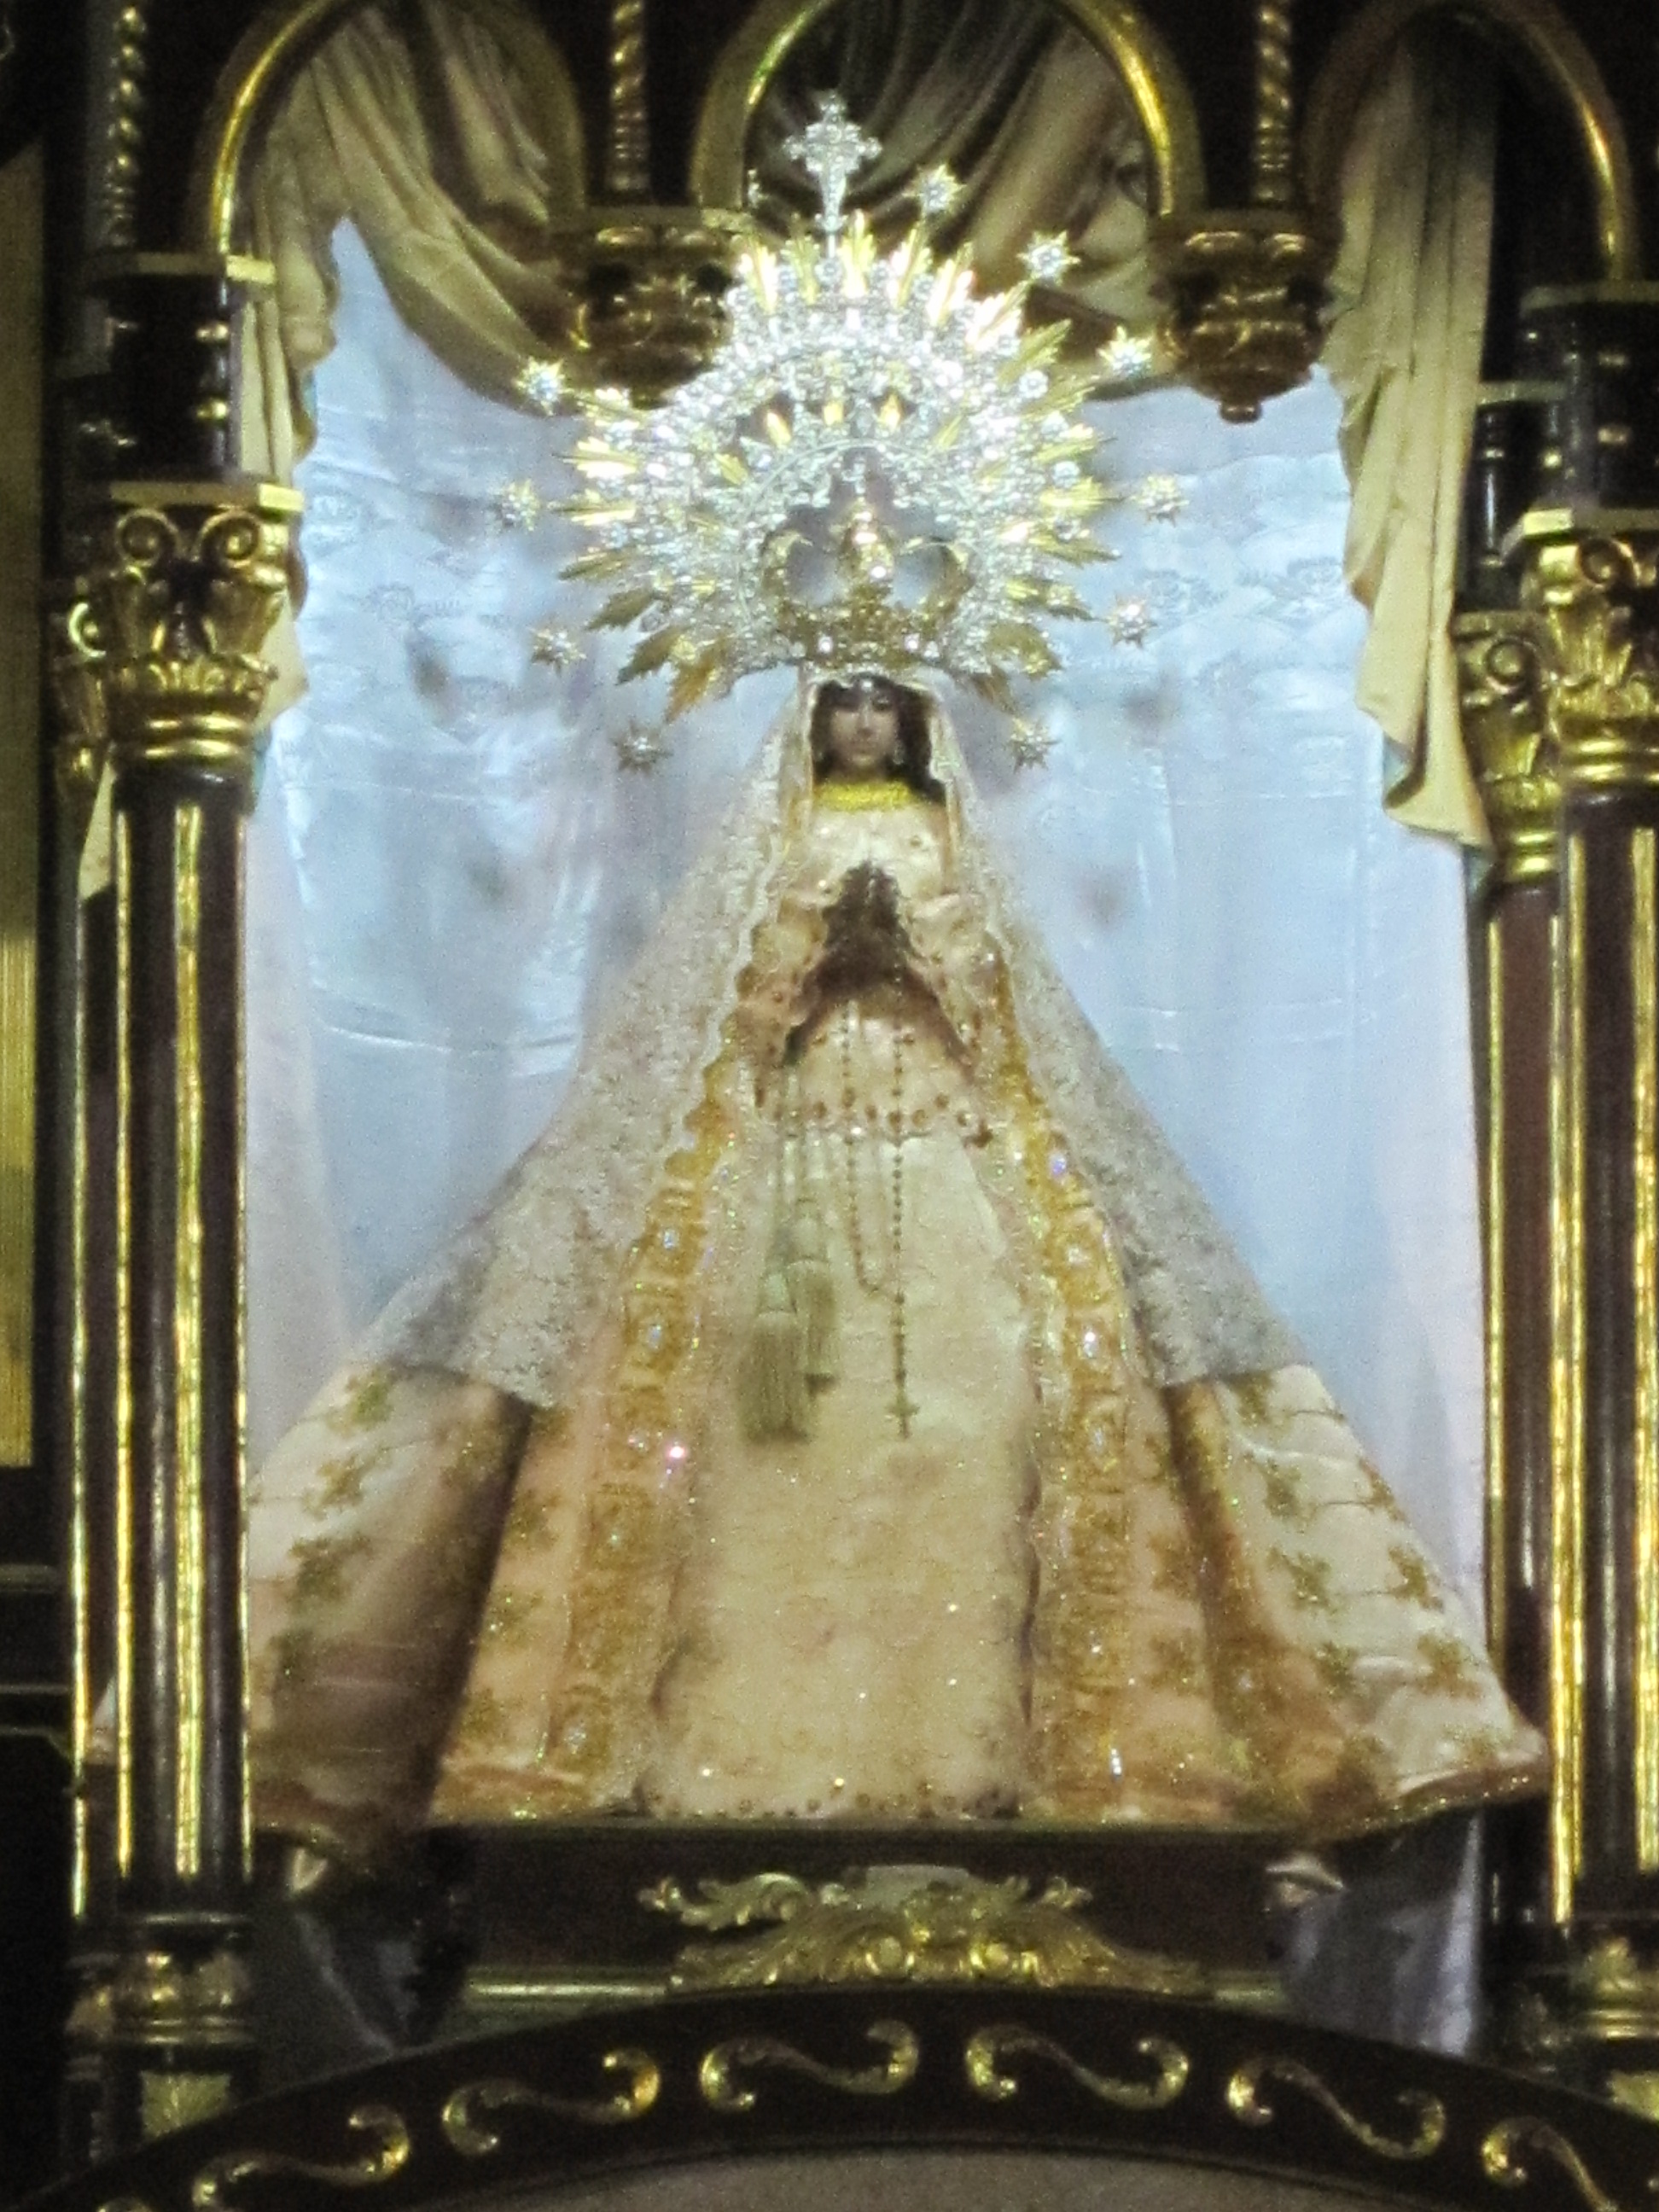 The Our Lady of Salambao